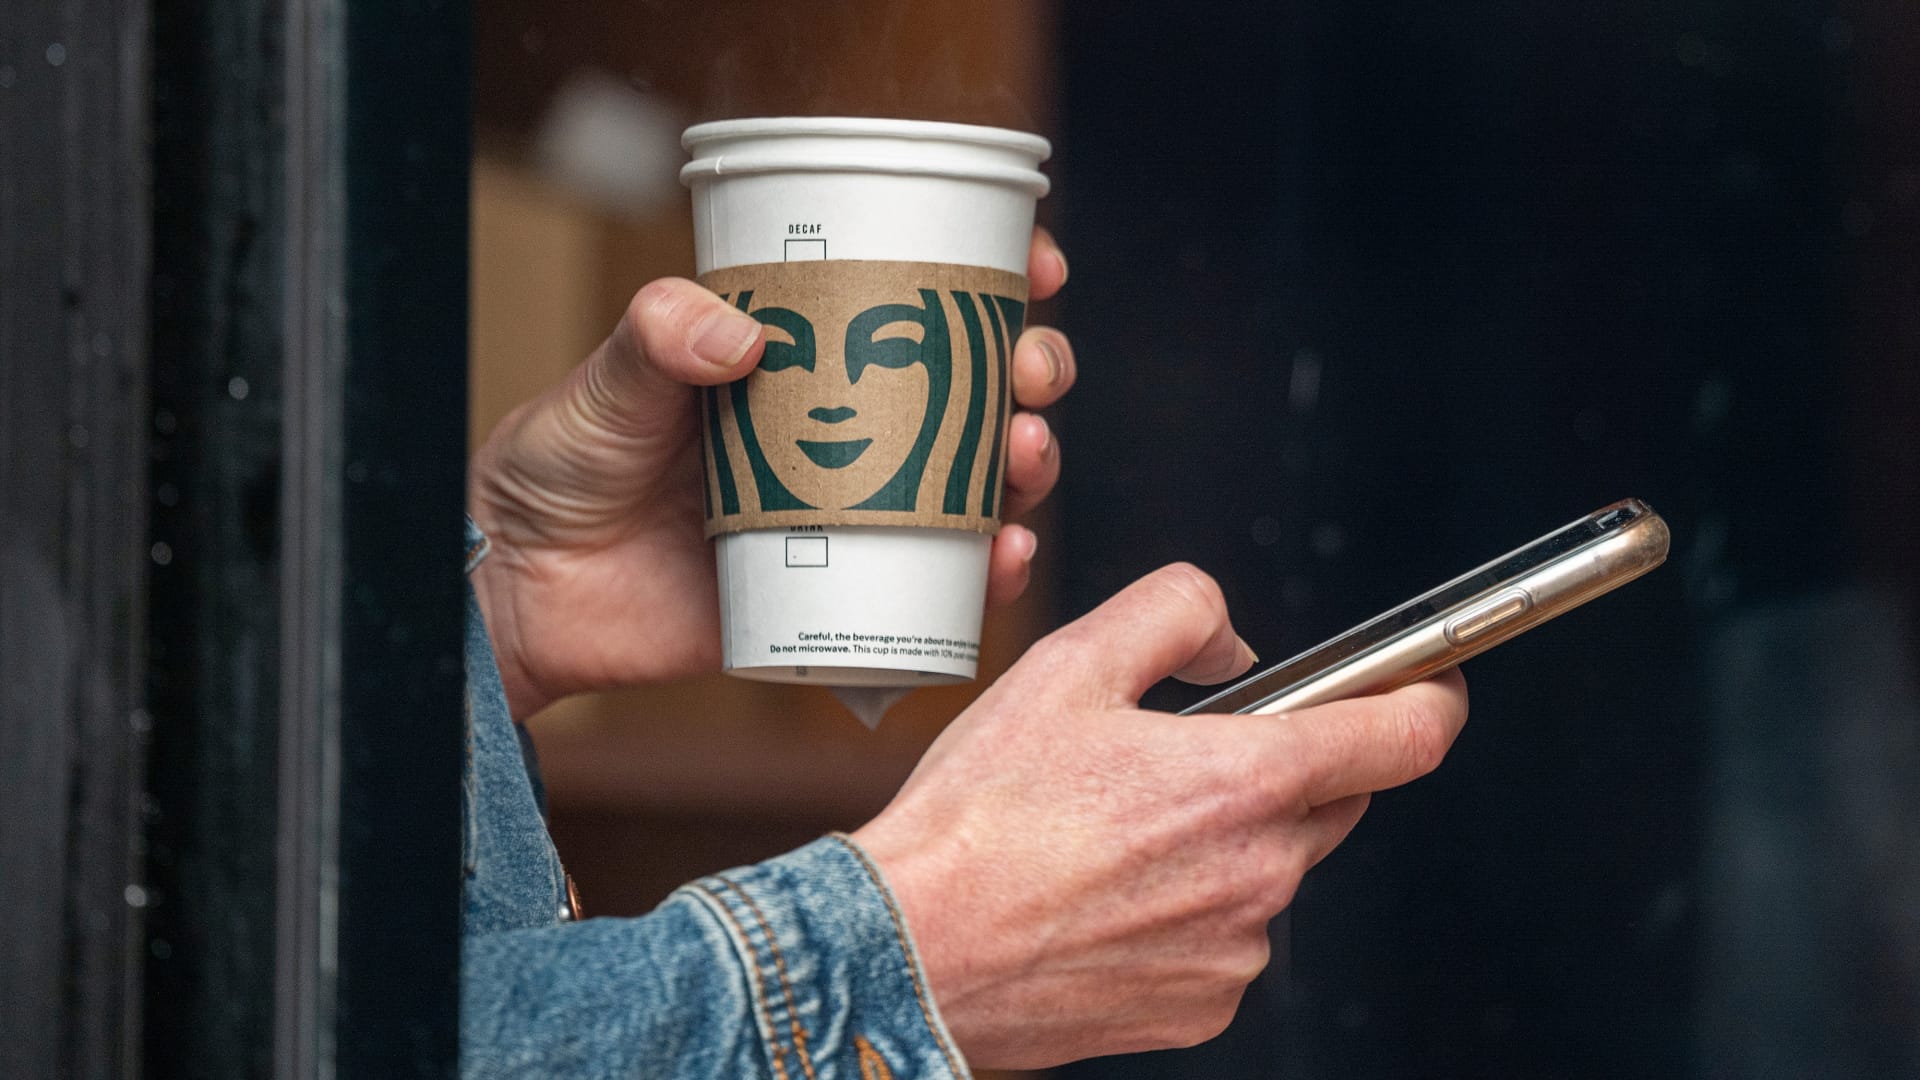 Stocks making the biggest moves midday: Starbucks, Twilio, Carvana, DoorDash and more